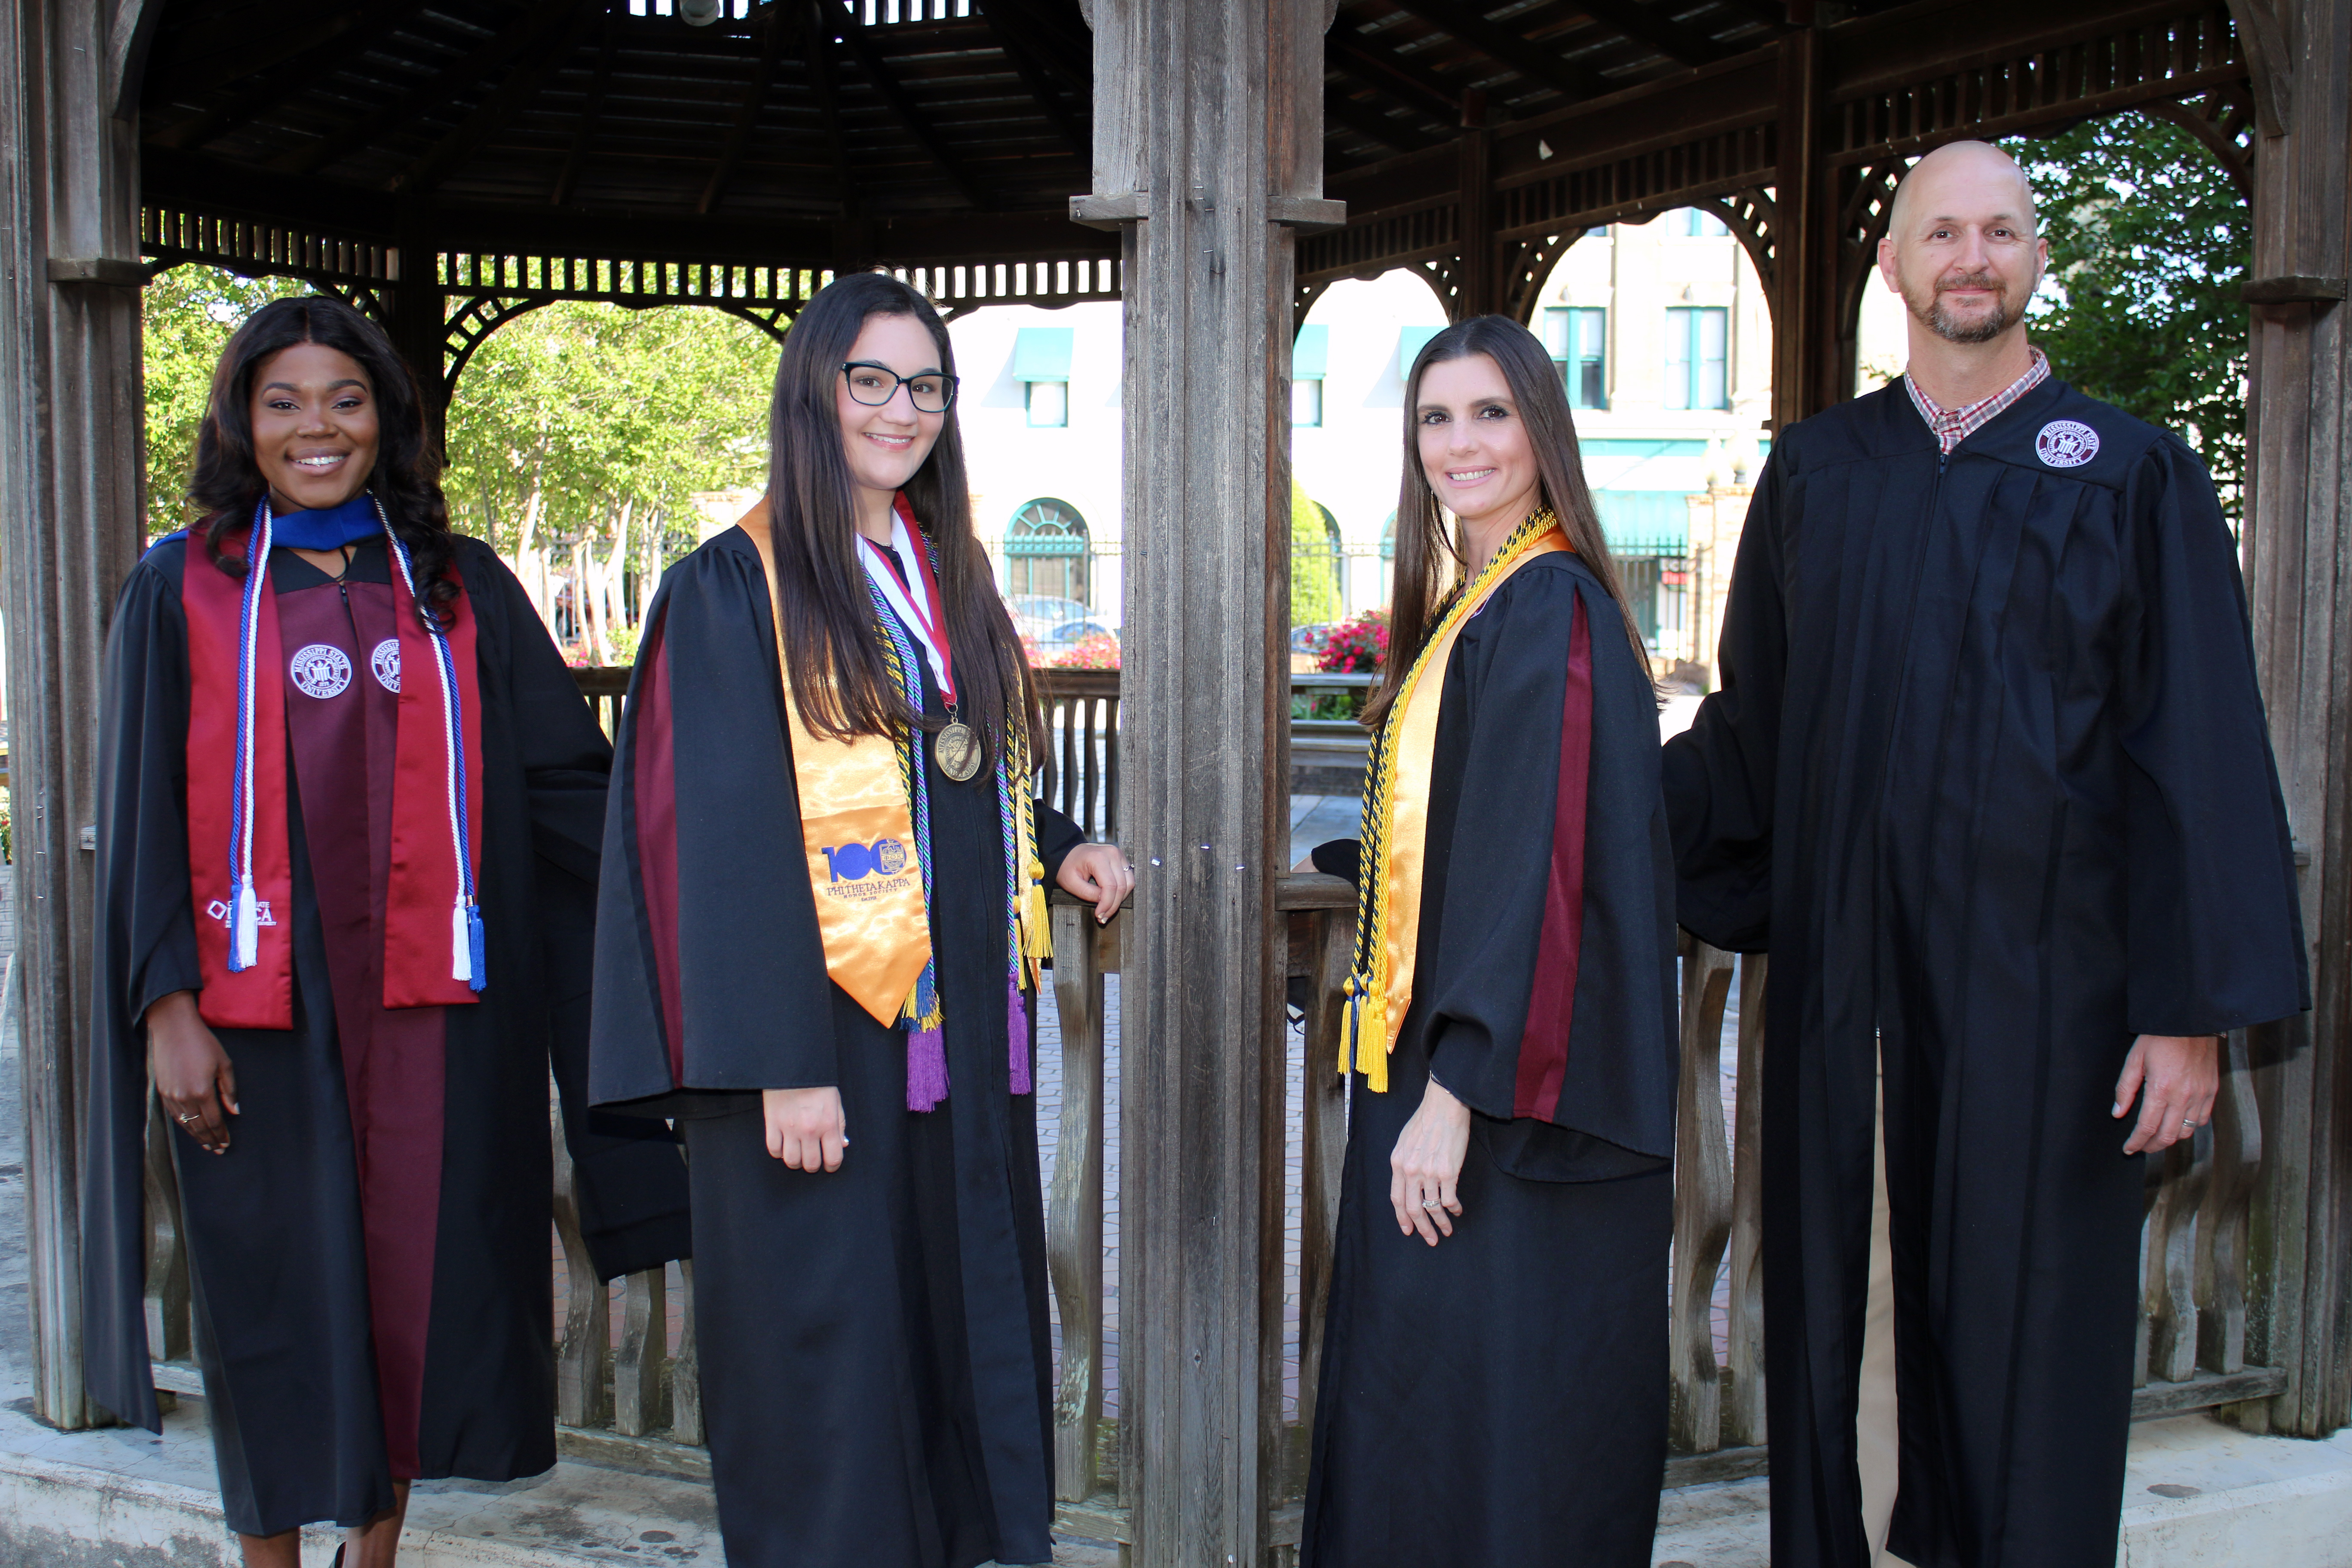 Four students one black female, one white female with glasses, one white female with long black hair and one white tall male all in graduation regalia